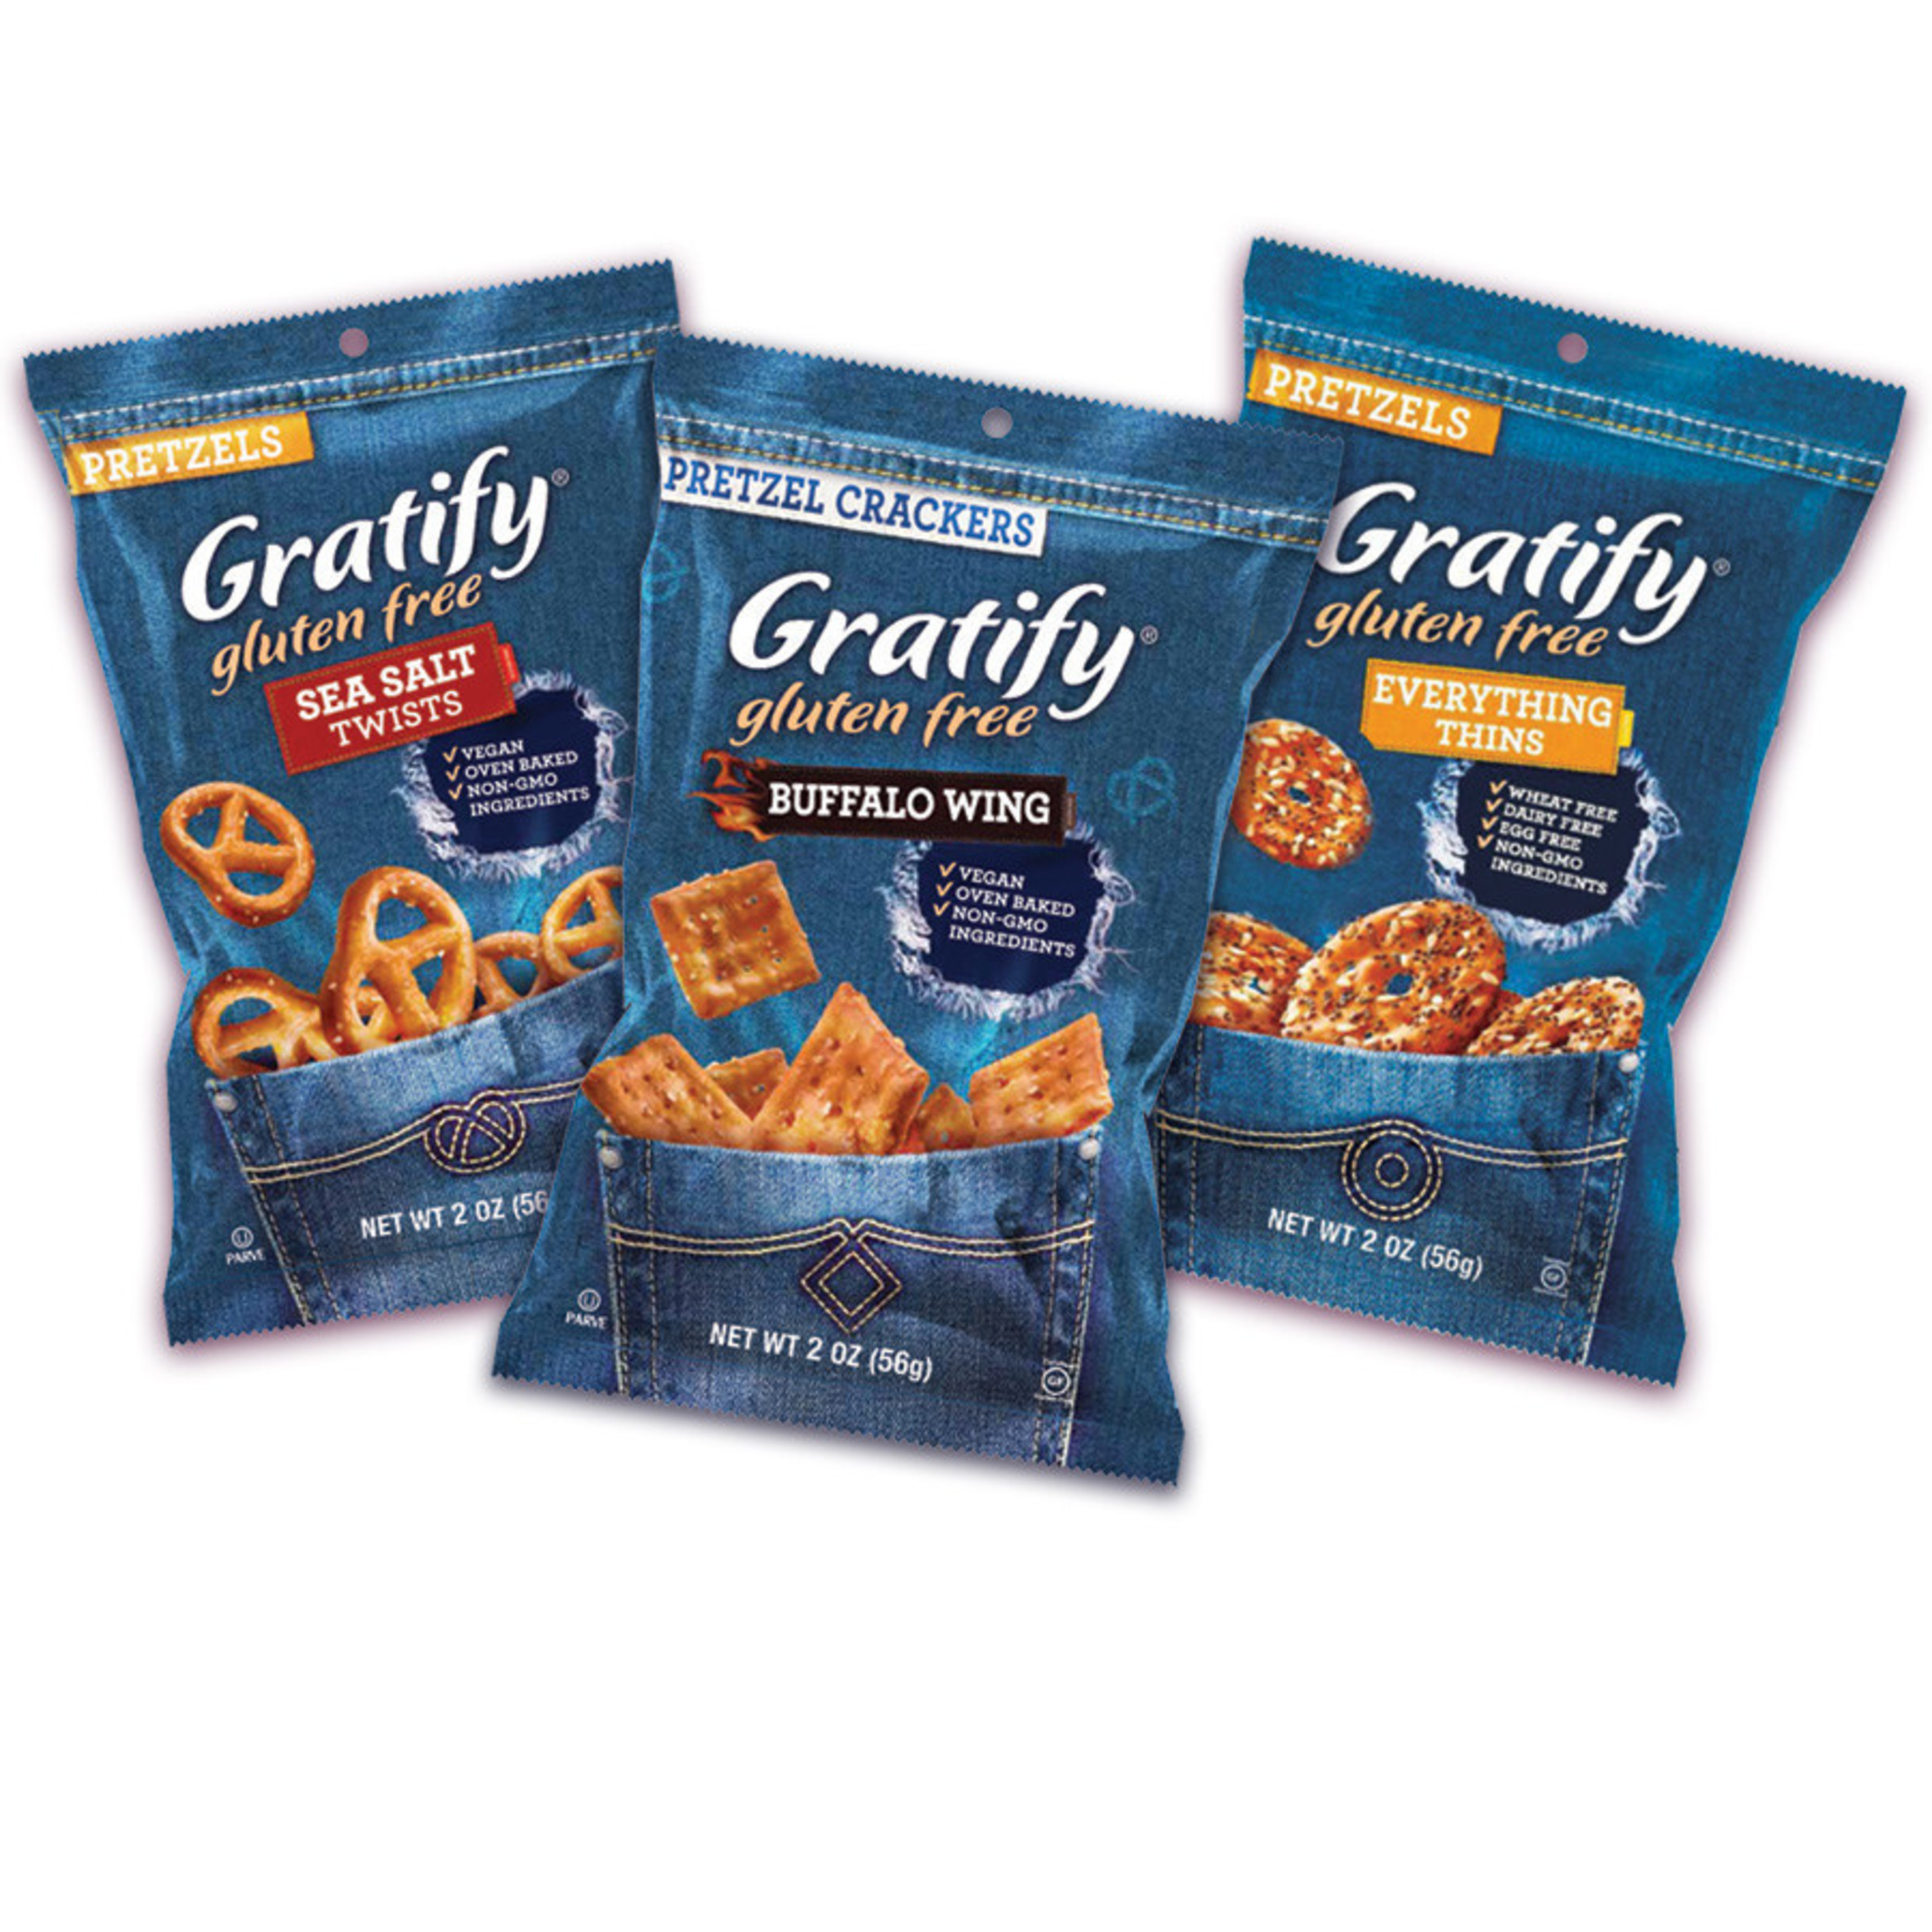 New 2-ounce Gratify gluten free pretzel snack packs available for convenience stores in early 2016.